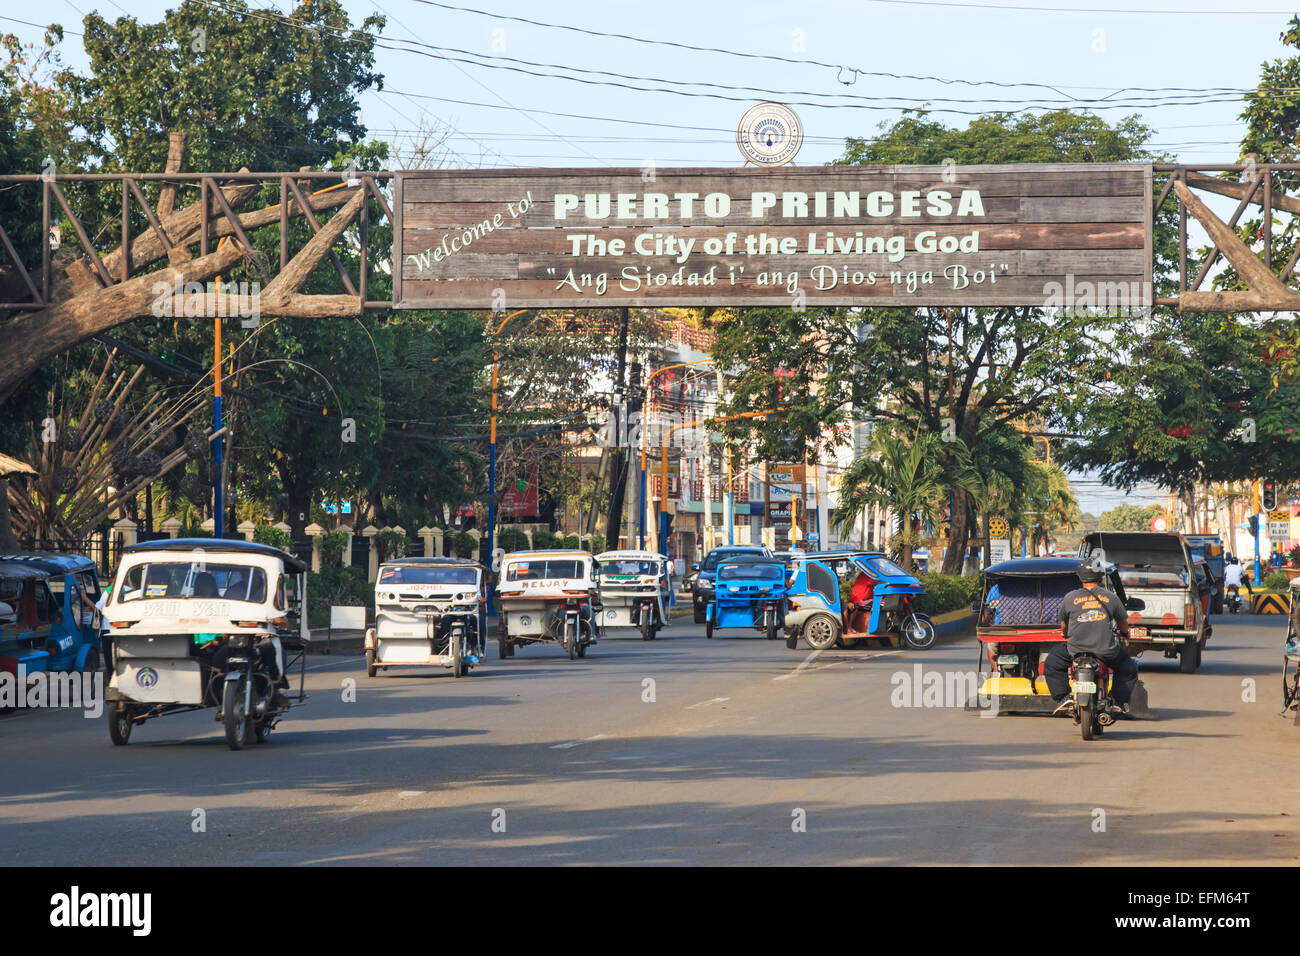 Puerto Princesa, January 20, 2015: Street crowded with many tricycles, very common in the Philippines Stock Photo